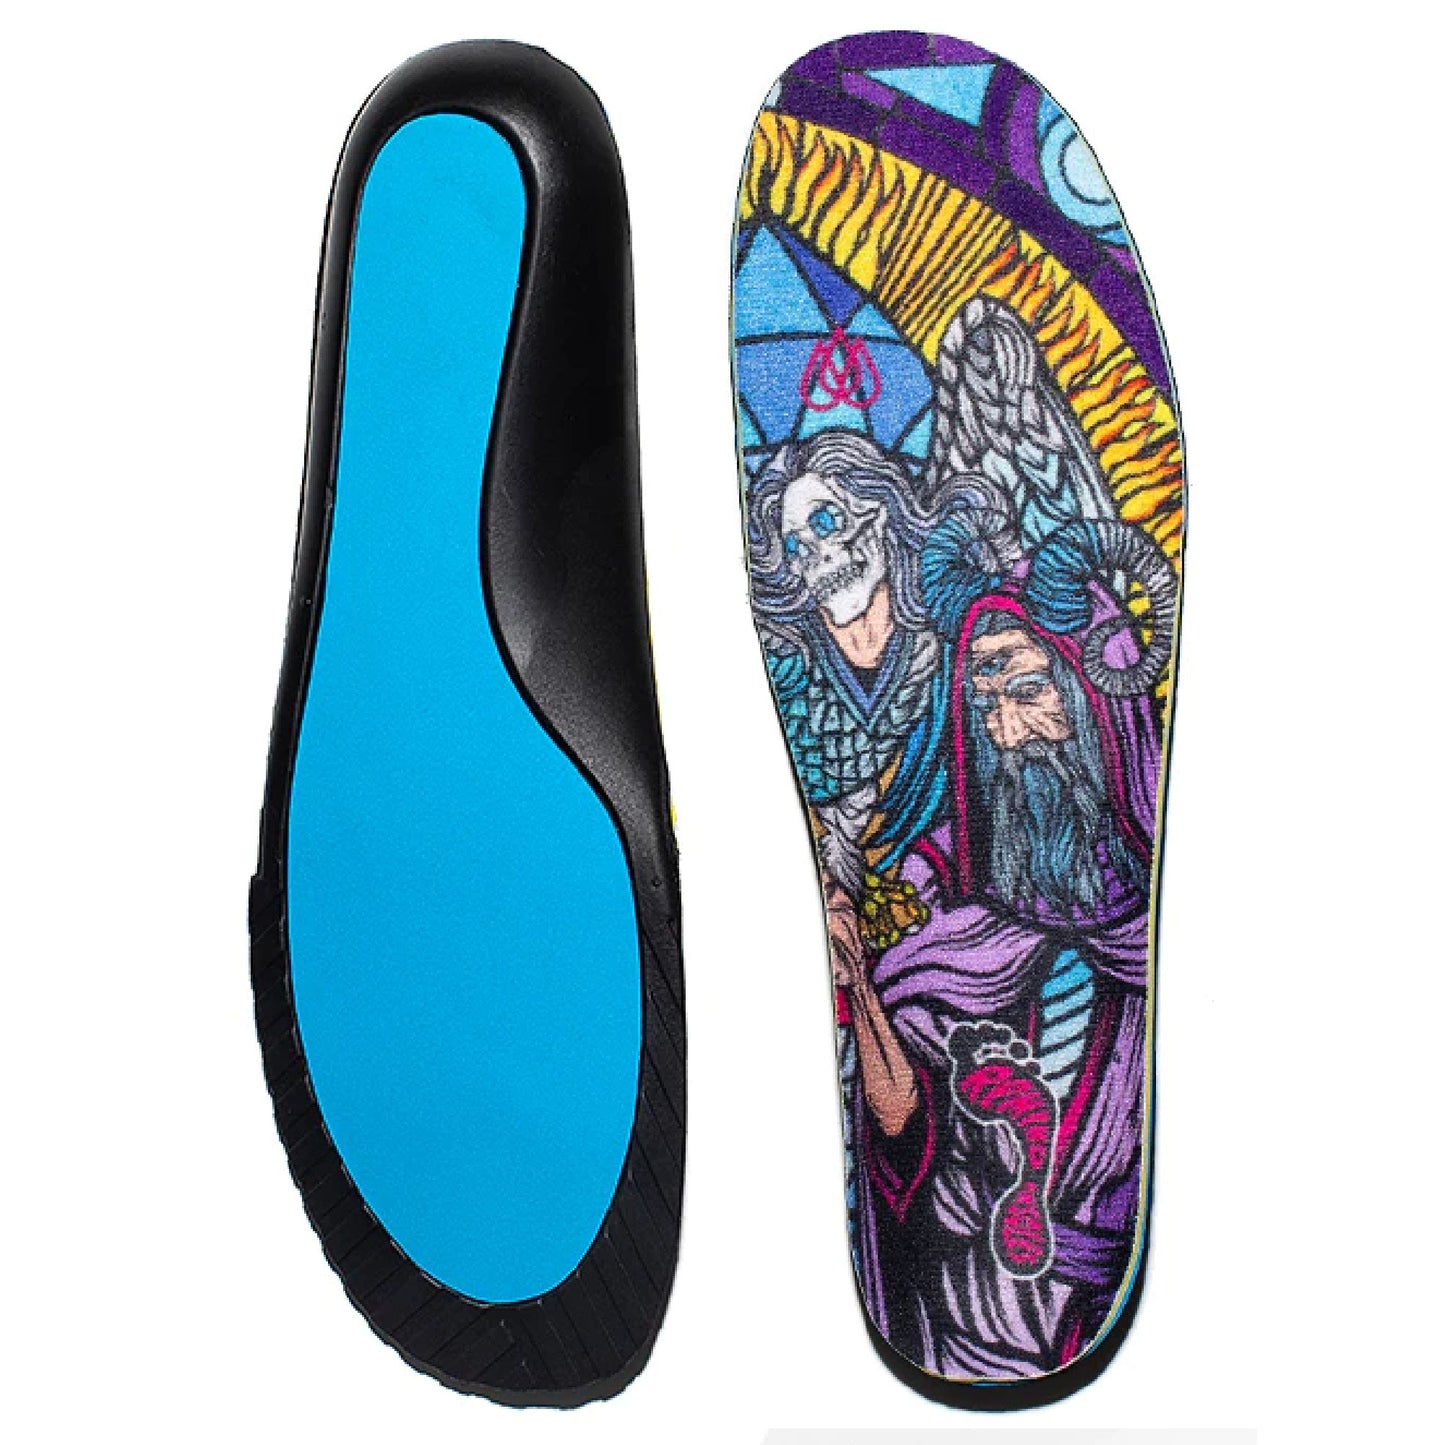 Remind Insoles Medic Impact 6mm Insoles Travis Rice 3rd Eye Insoles